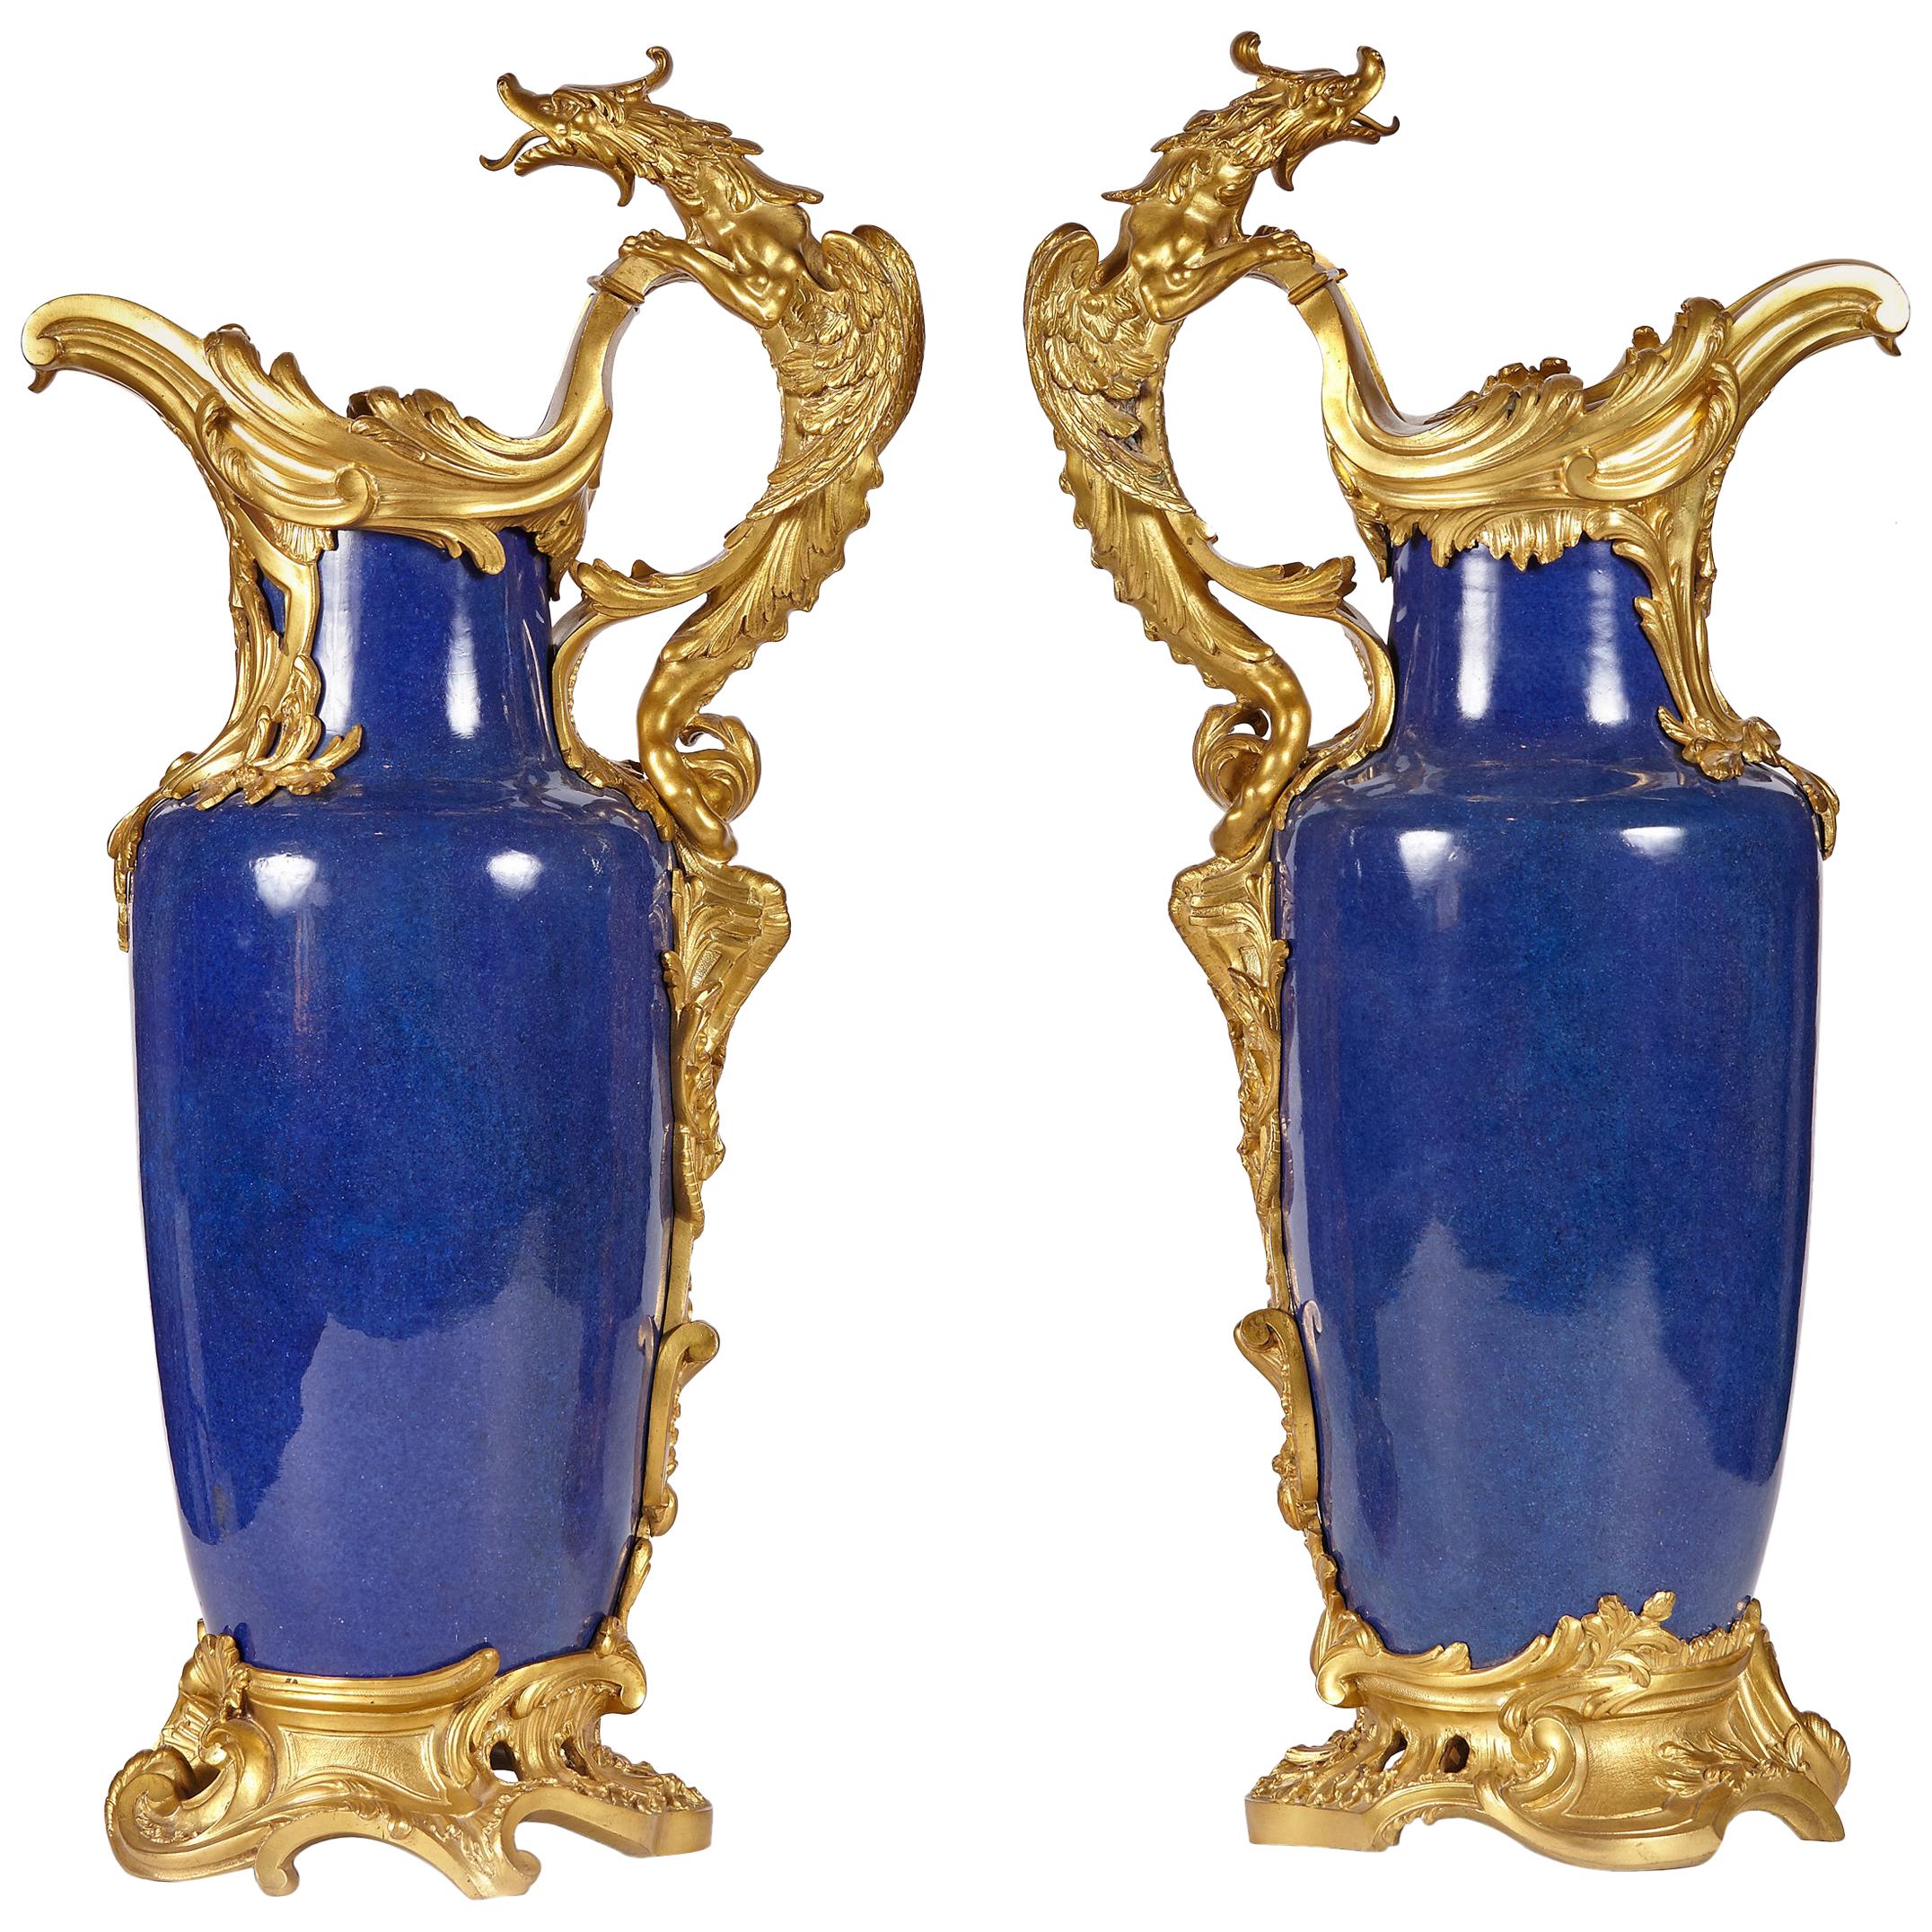 Pair of 19th Century French Louis XV Style Gilt Bronze-Mounted Chinese Vases